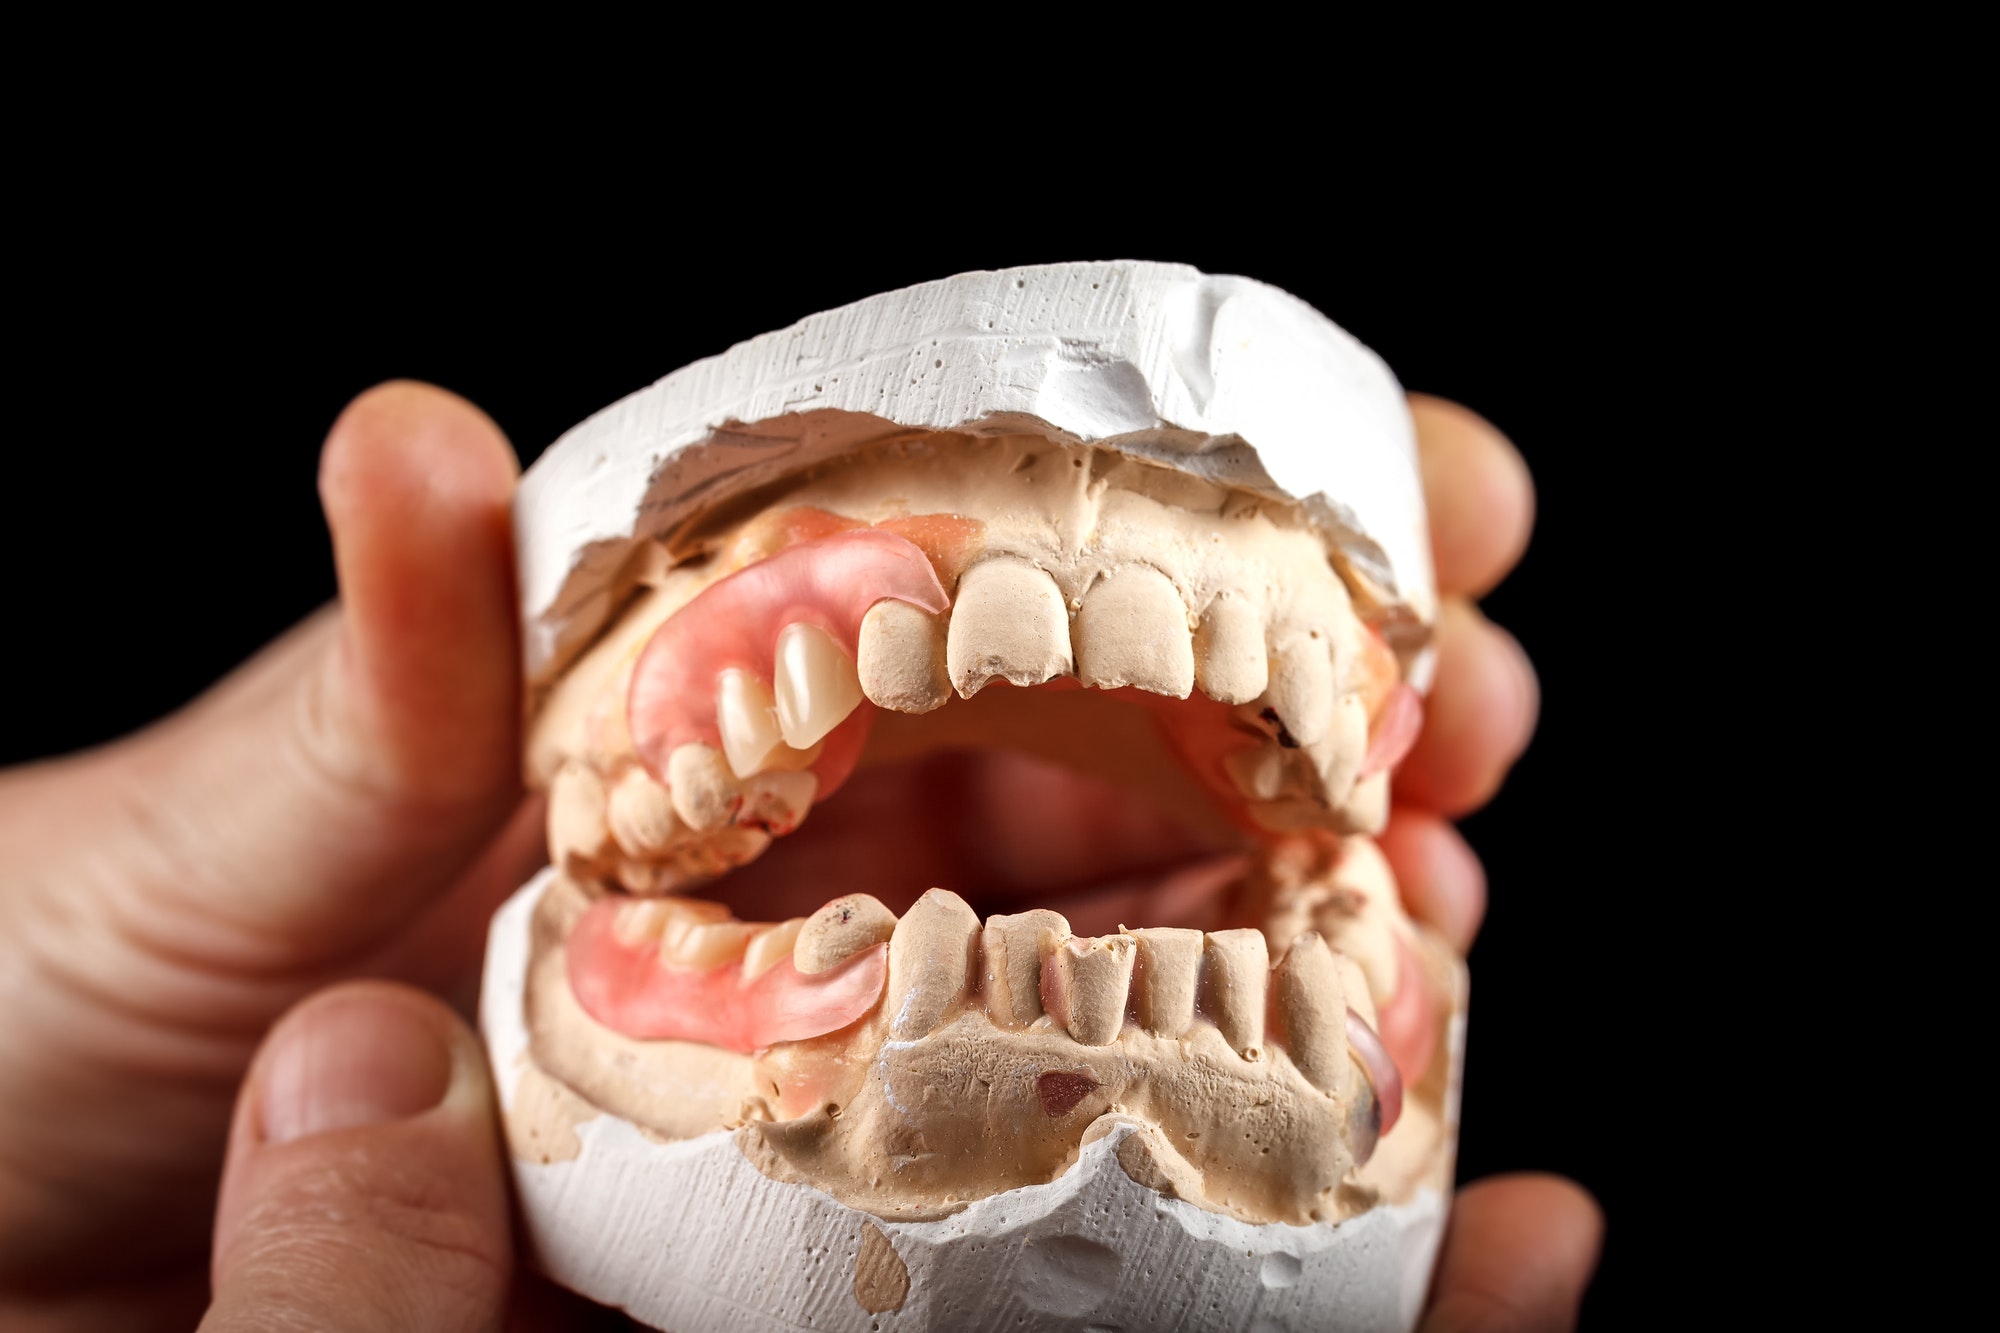 A denture on a gypsum base in the hand of a dentist. Close-up on a black background